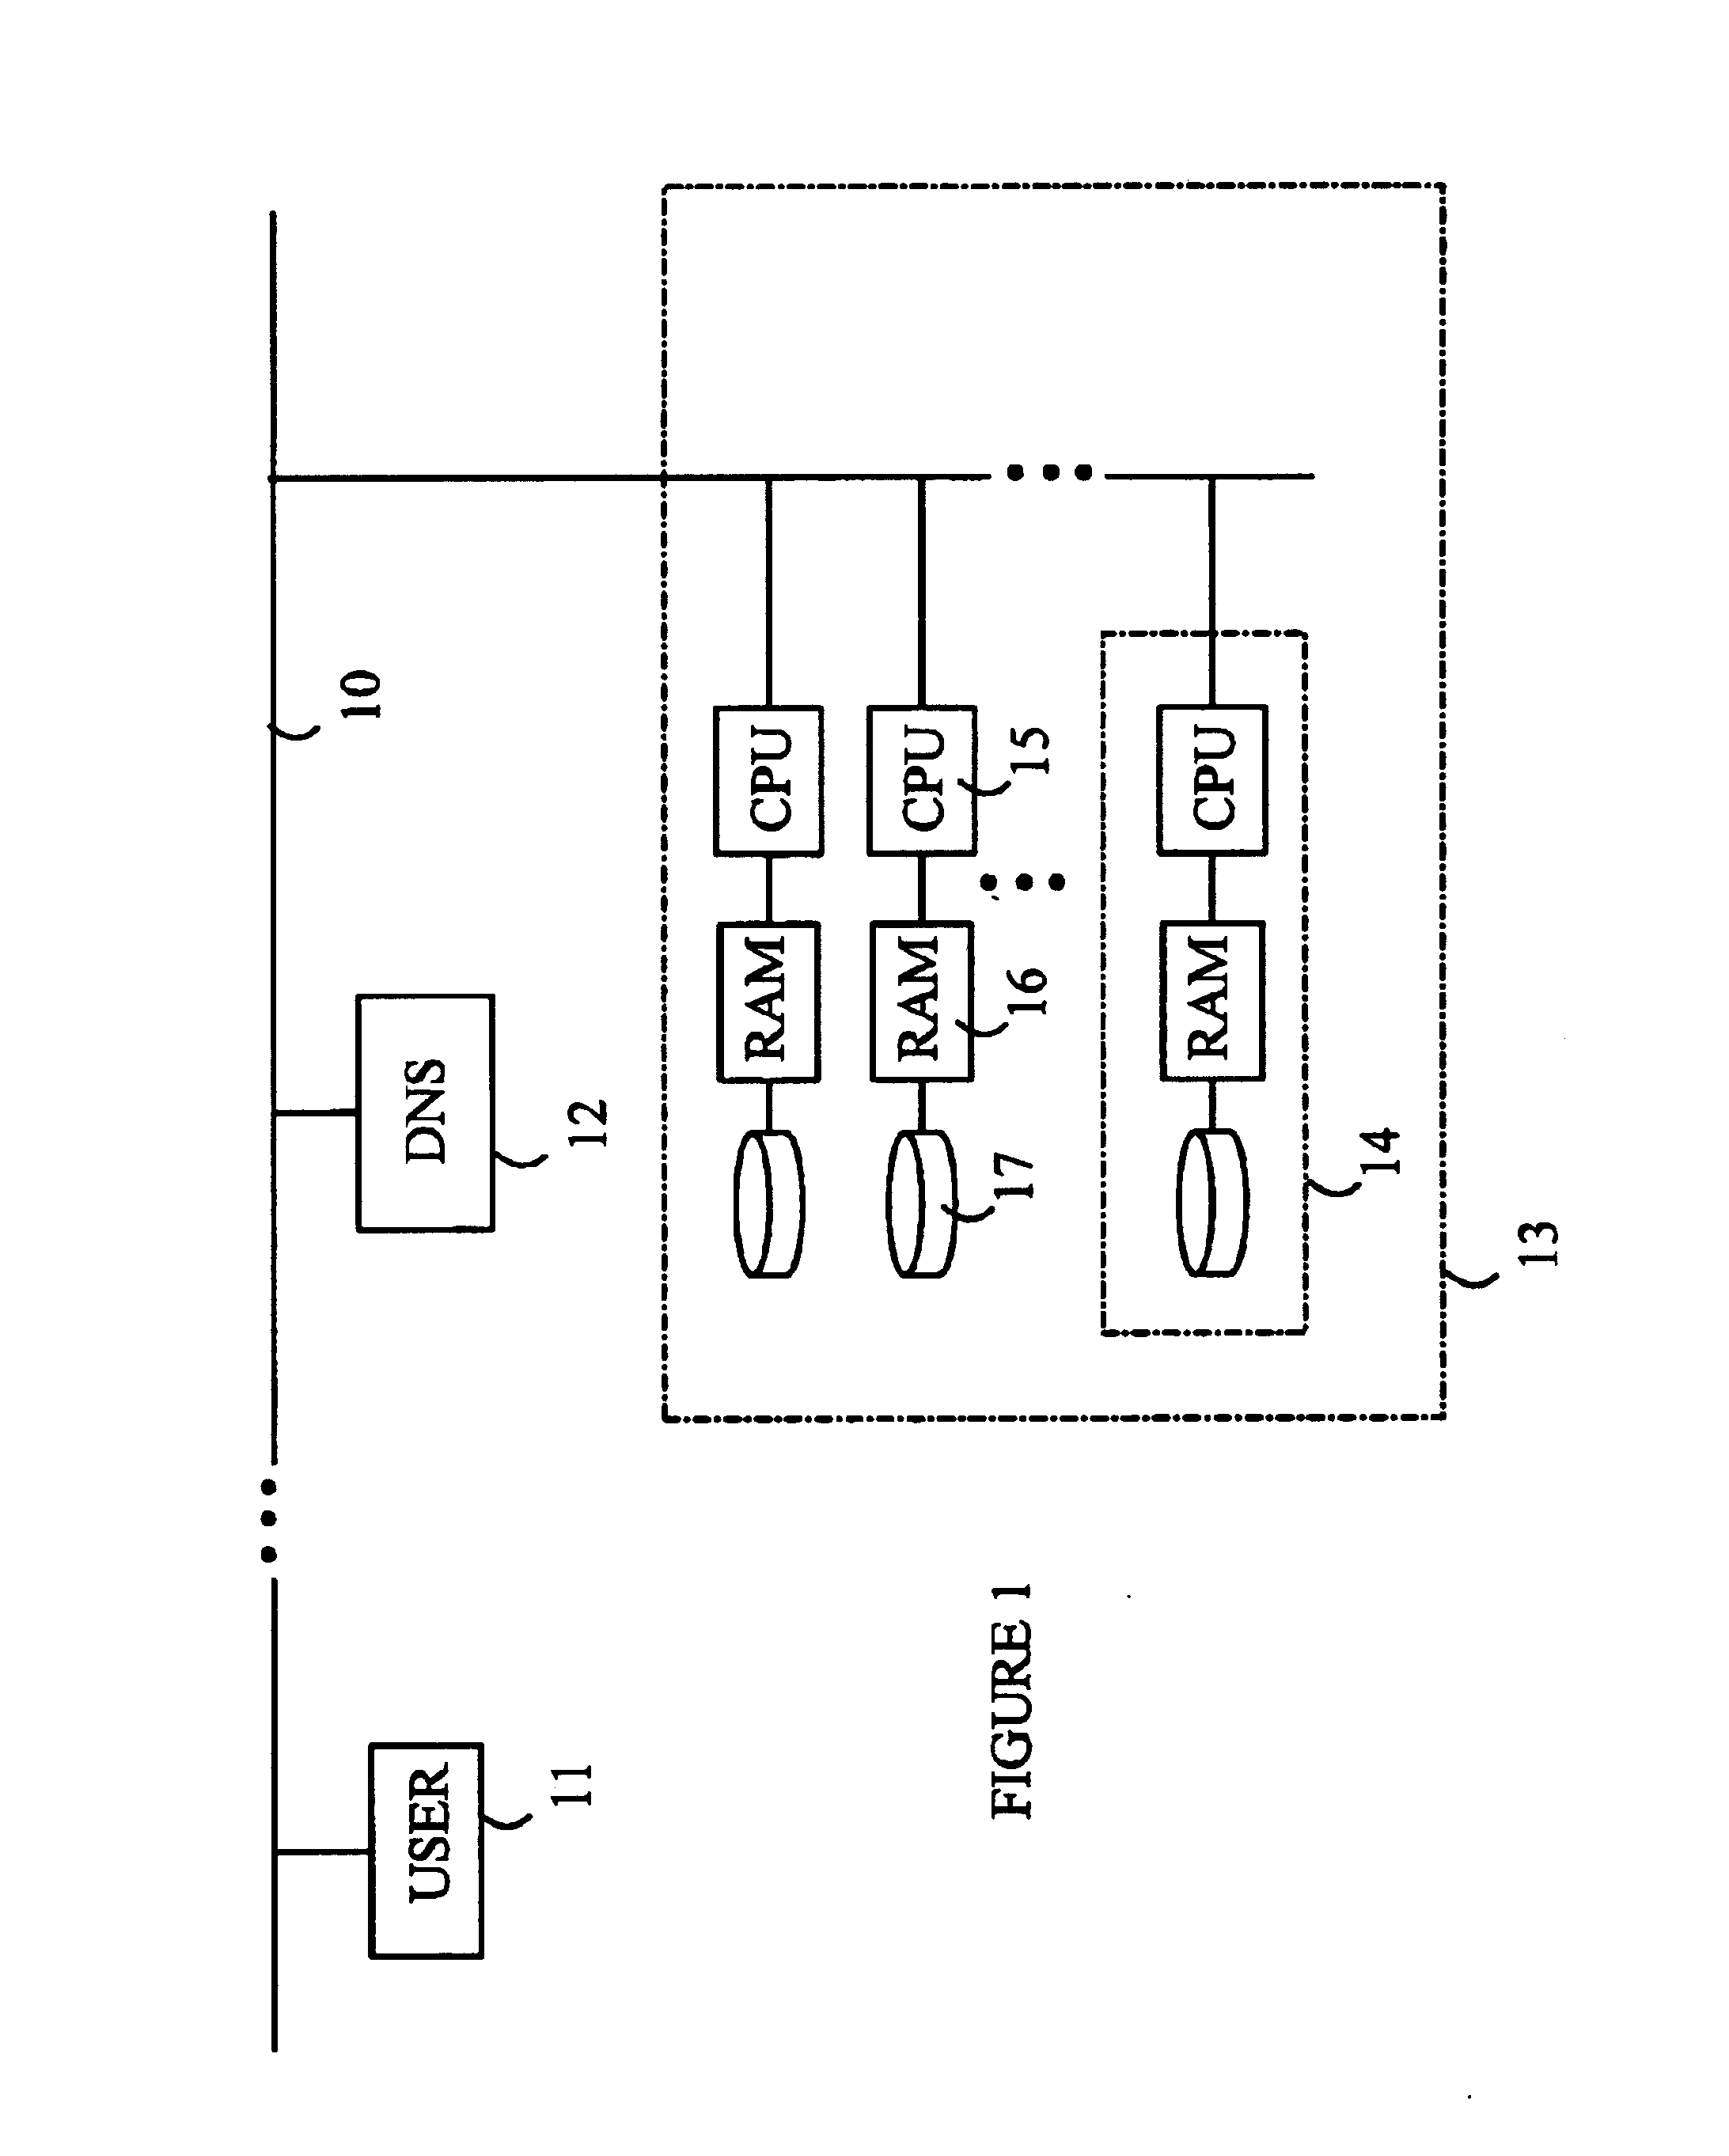 Method for allocating web sites on a web server cluster based on balancing memory and load requirements